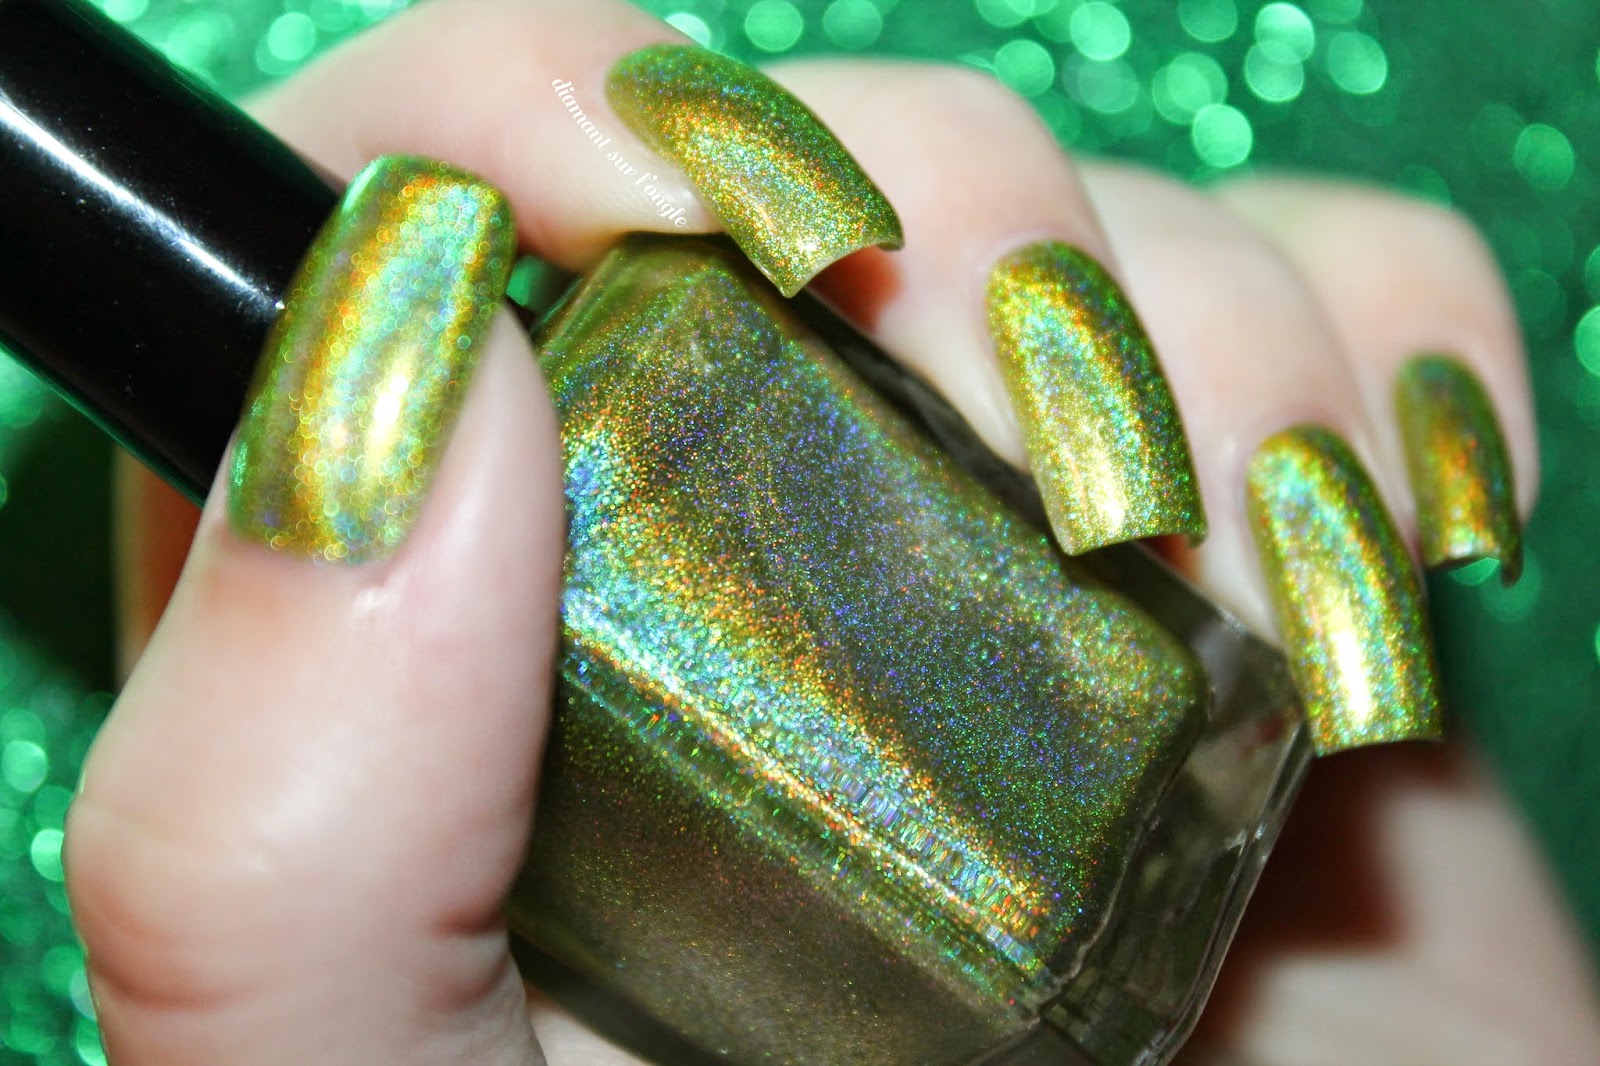 Swatch of March 2014 by Enchanted Polish